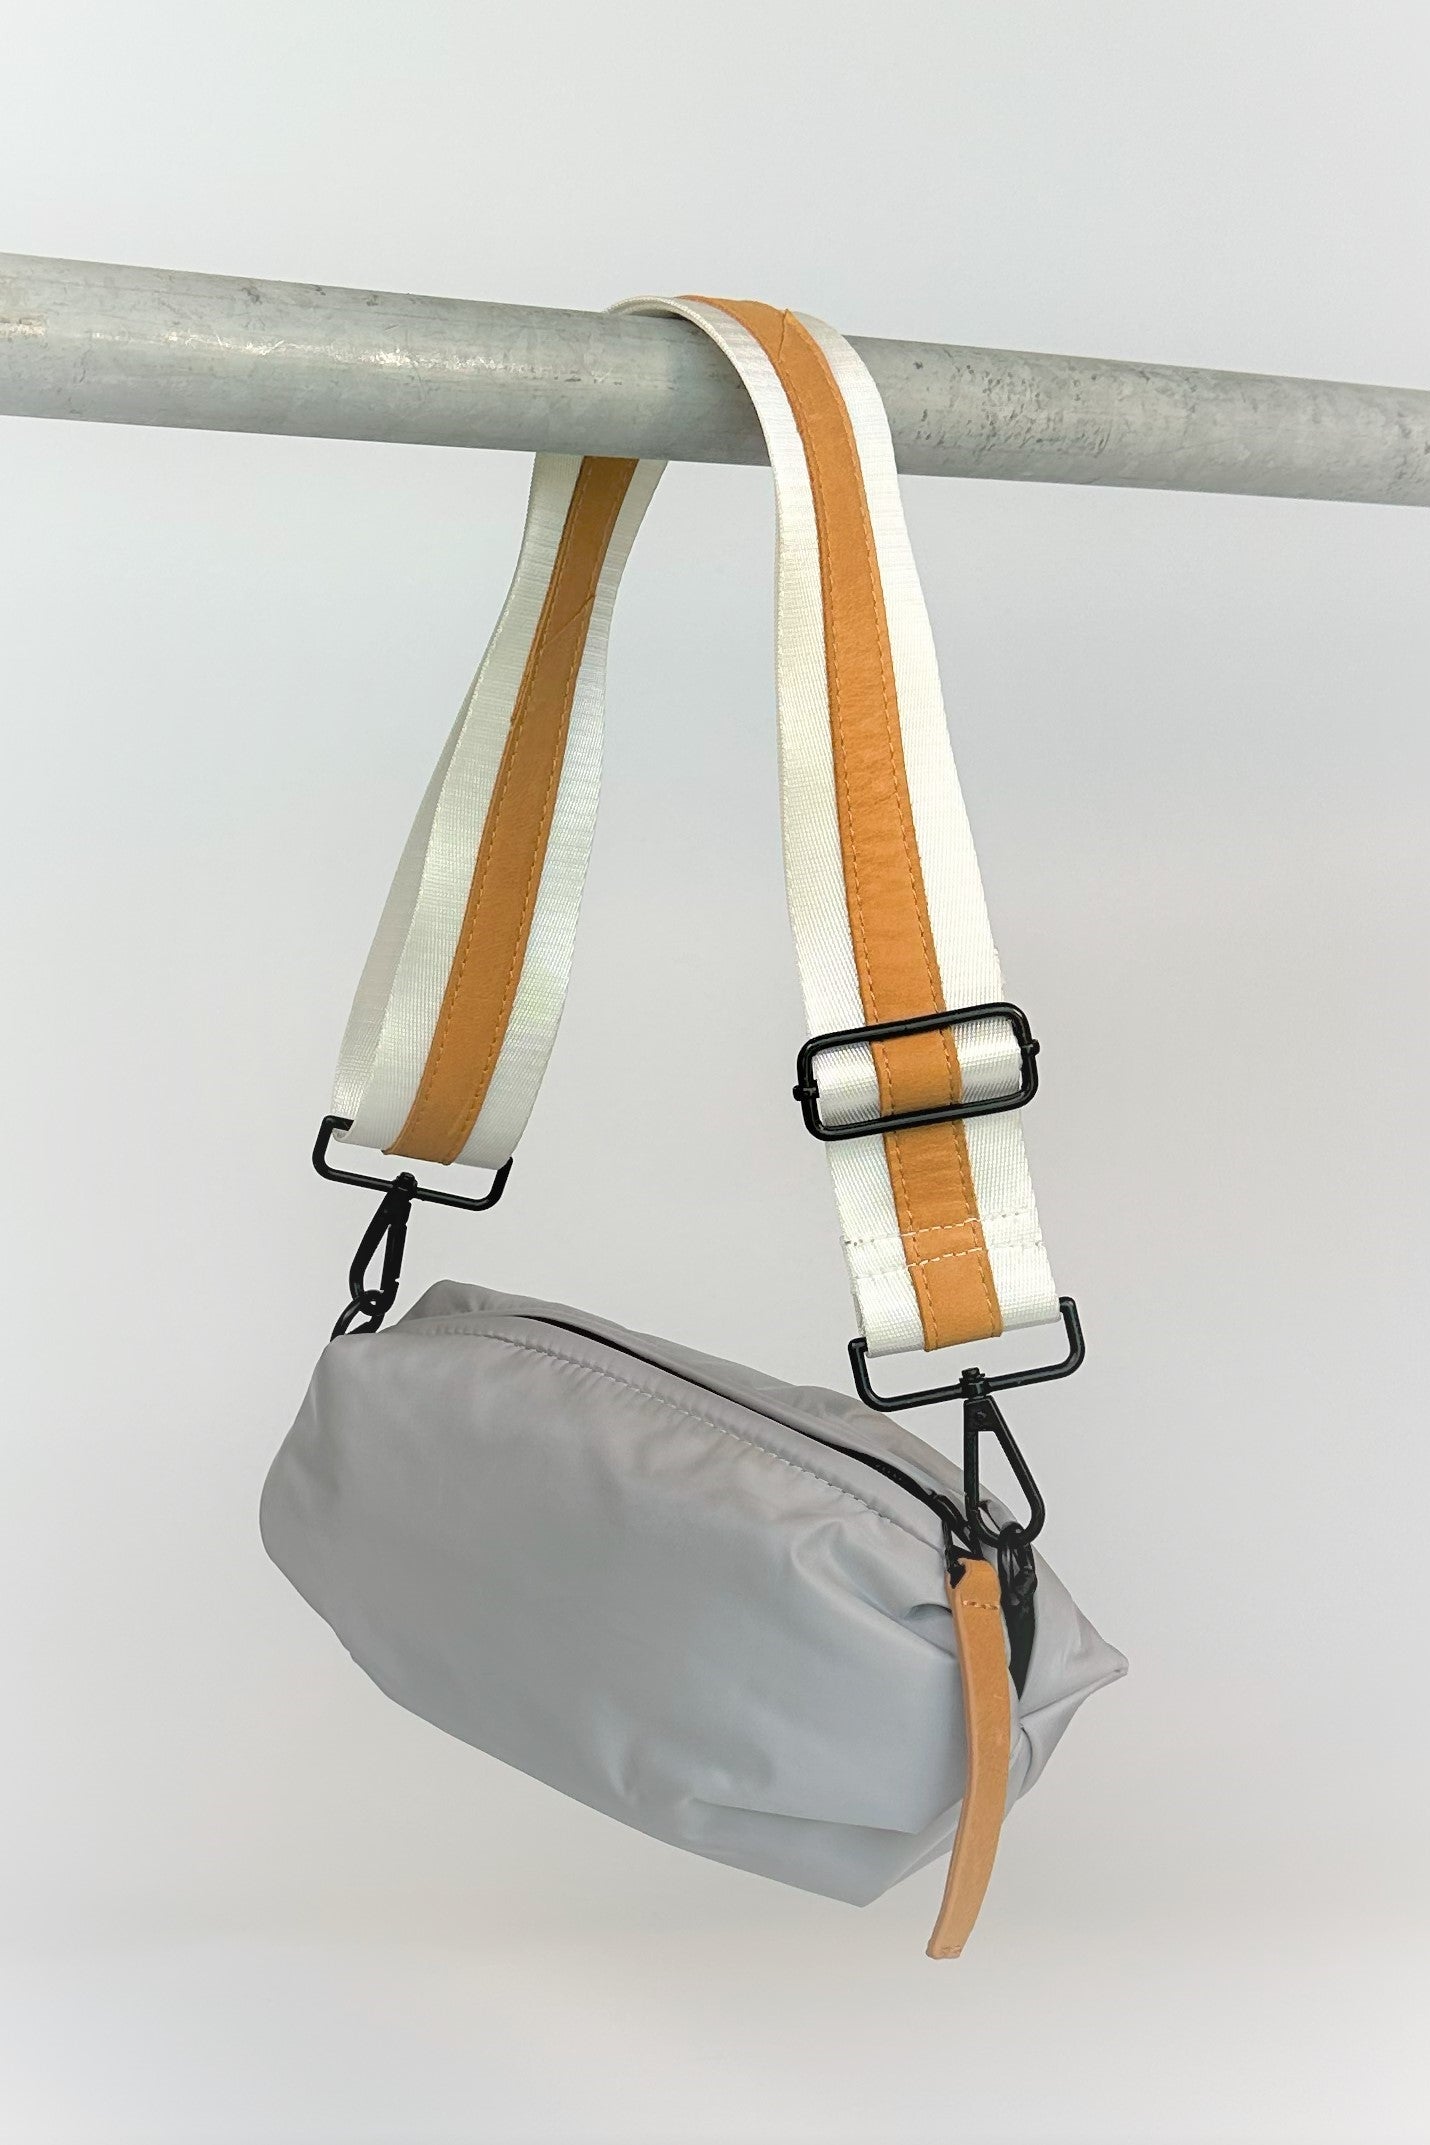 Gray nylon belt bag with white crossbody strap and tan leather detail